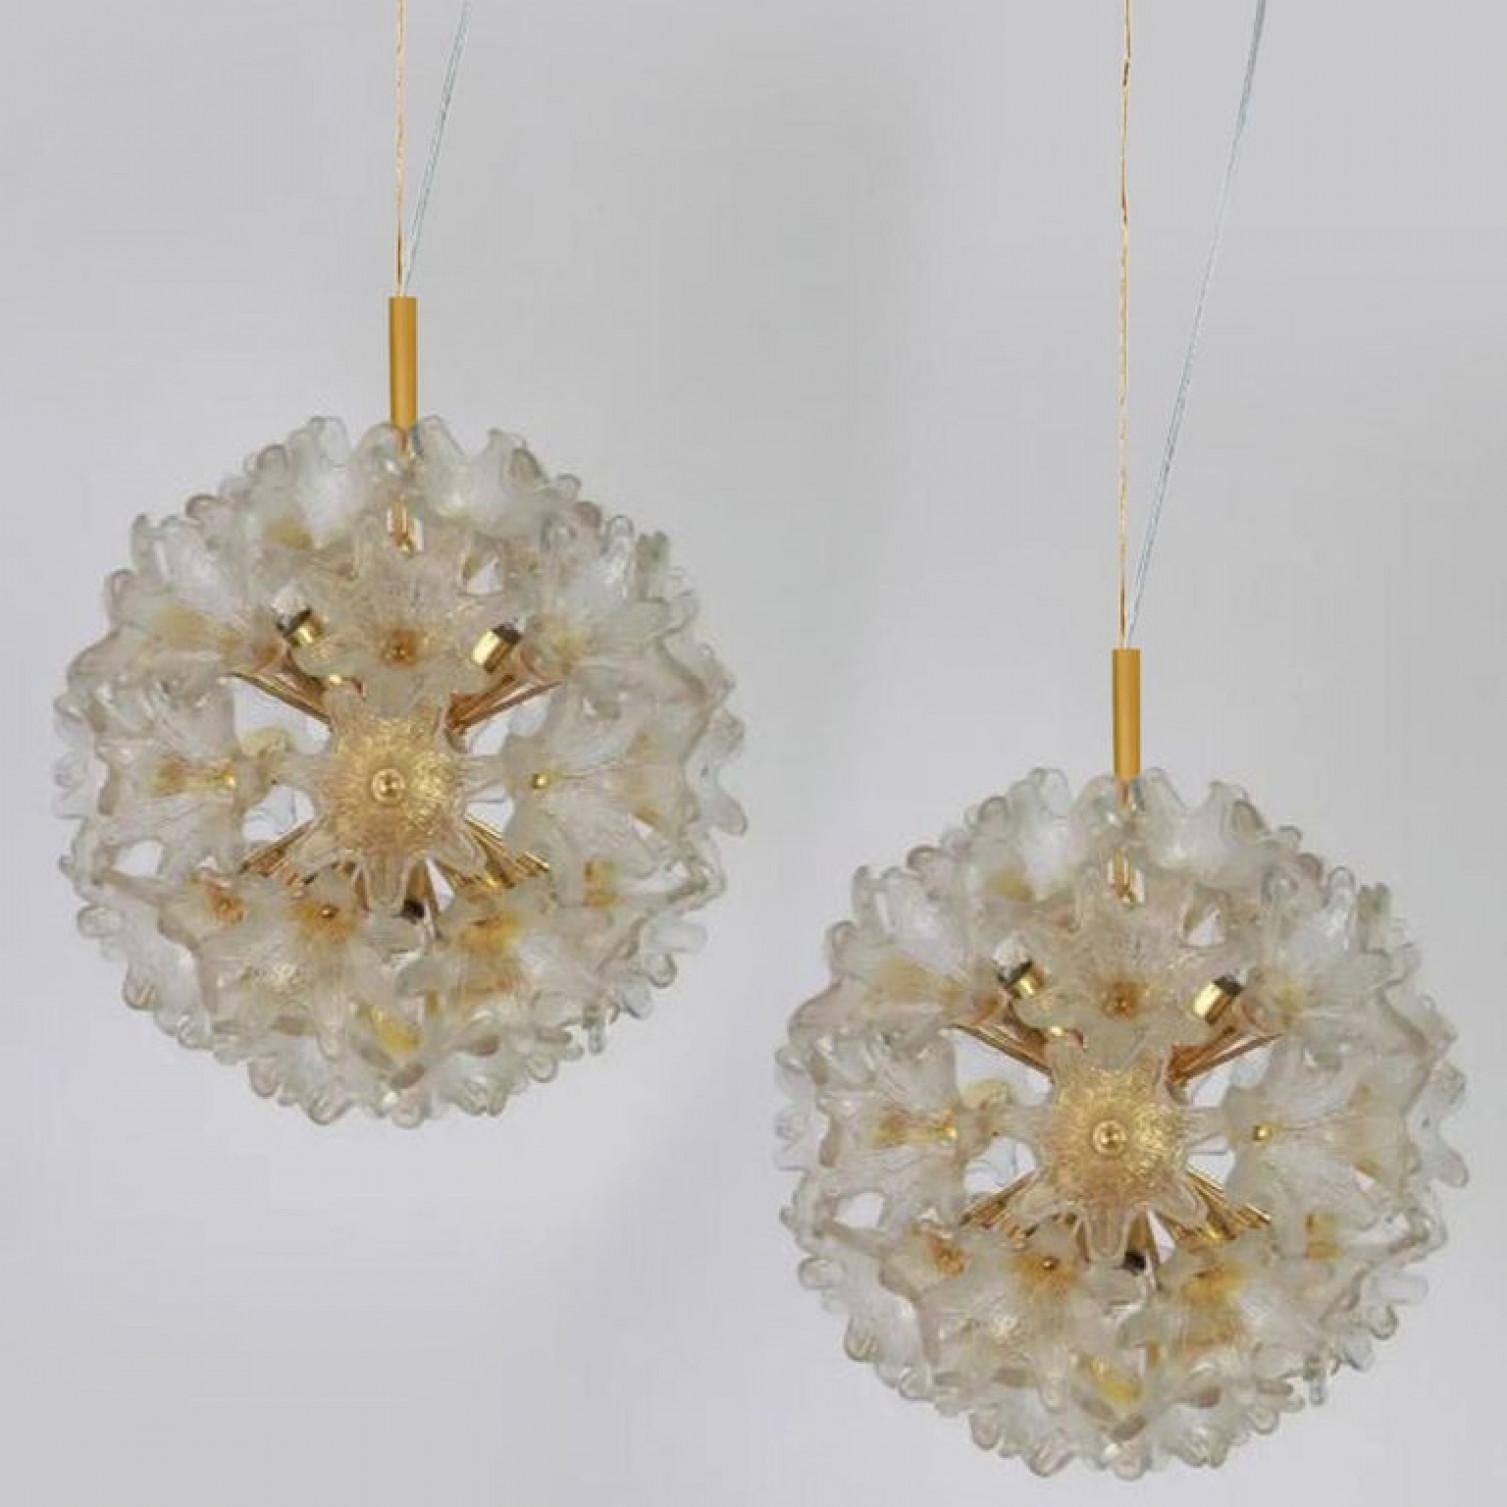 Elegant pair of Murano light fixtures by Paolo Venini for VeArt, Italy, 1960s. Brass stem and hardware and white steel fixture. Several star shaped gold or amber and clear resembles flowers. The set illuminates beautifully on wall and